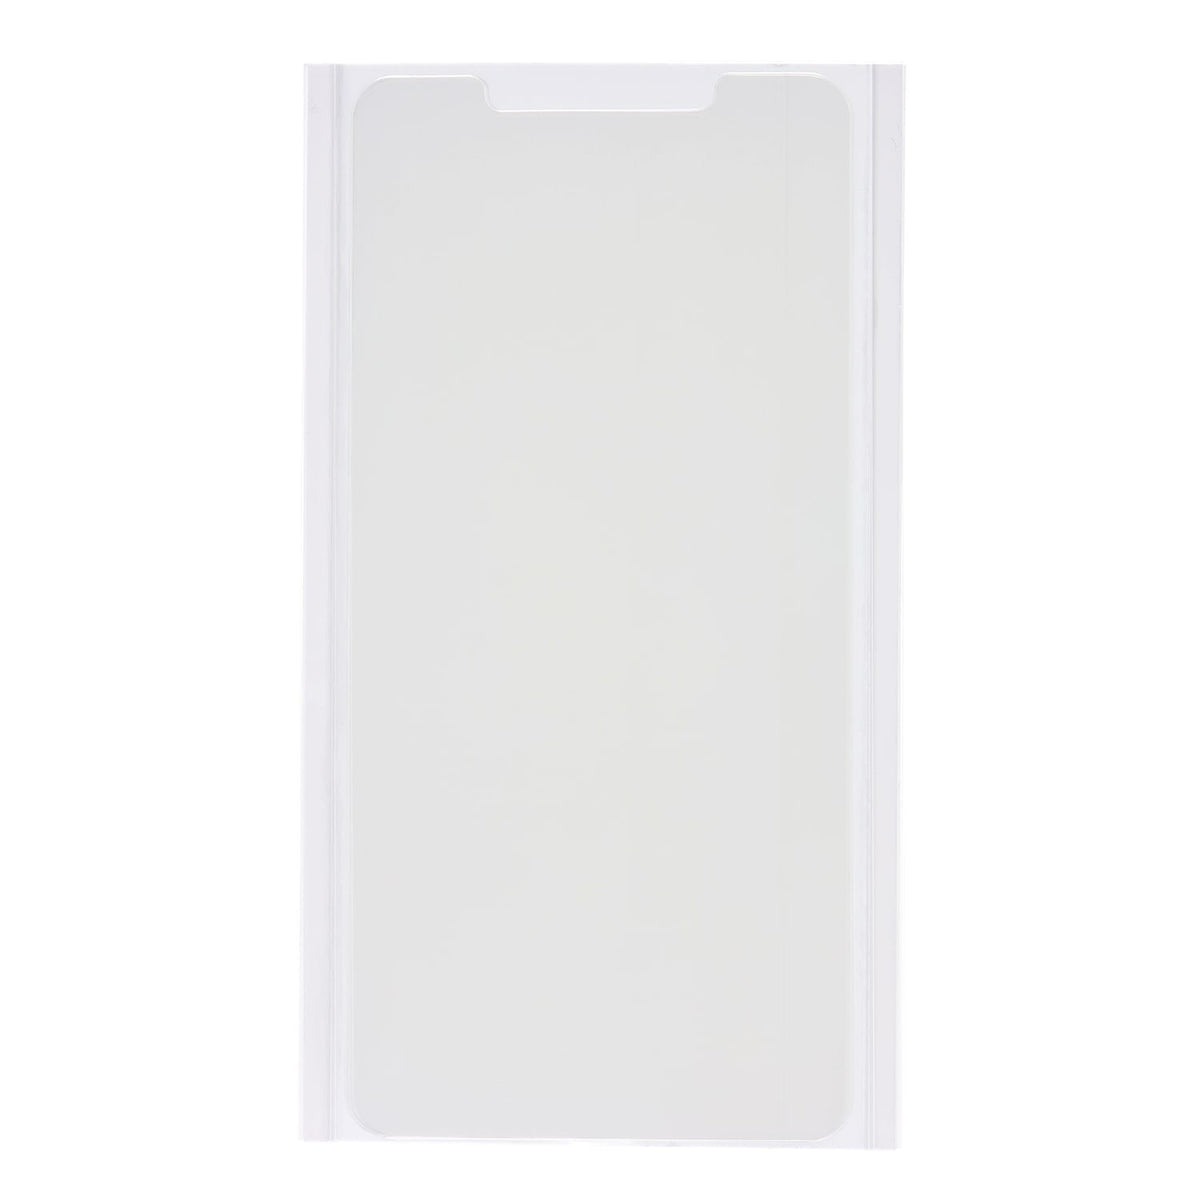 OCA OPTICAL CLEAR ADHESIVE DOUBLE-SIDE STICKER REPLACEMENT FOR IPHONE